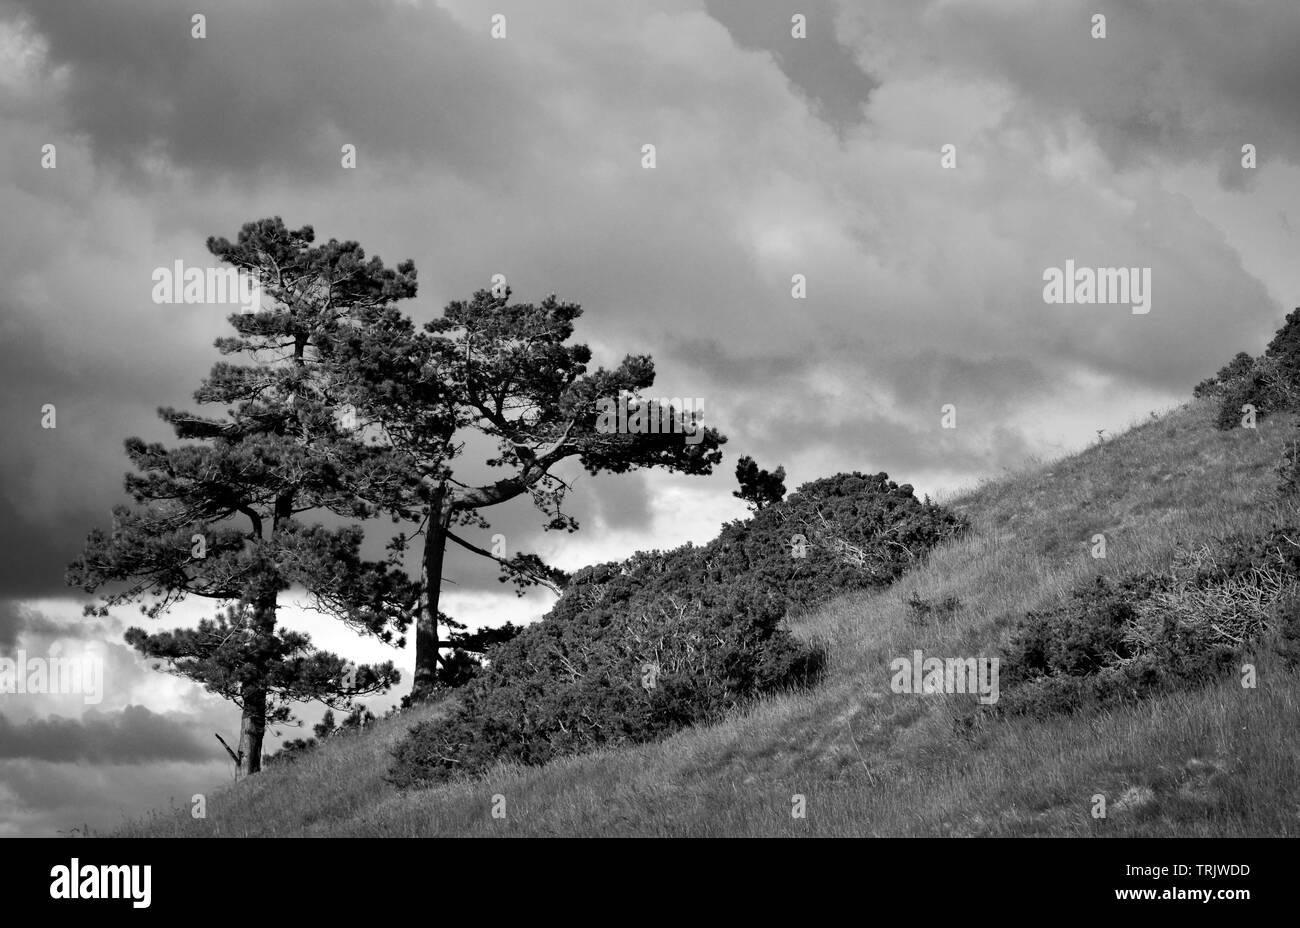 Monochrome or black and white photo of a tree on a mountain in the Clwydian Range of mountains looking towards Snowdonia in North Wales, Uk Stock Photo